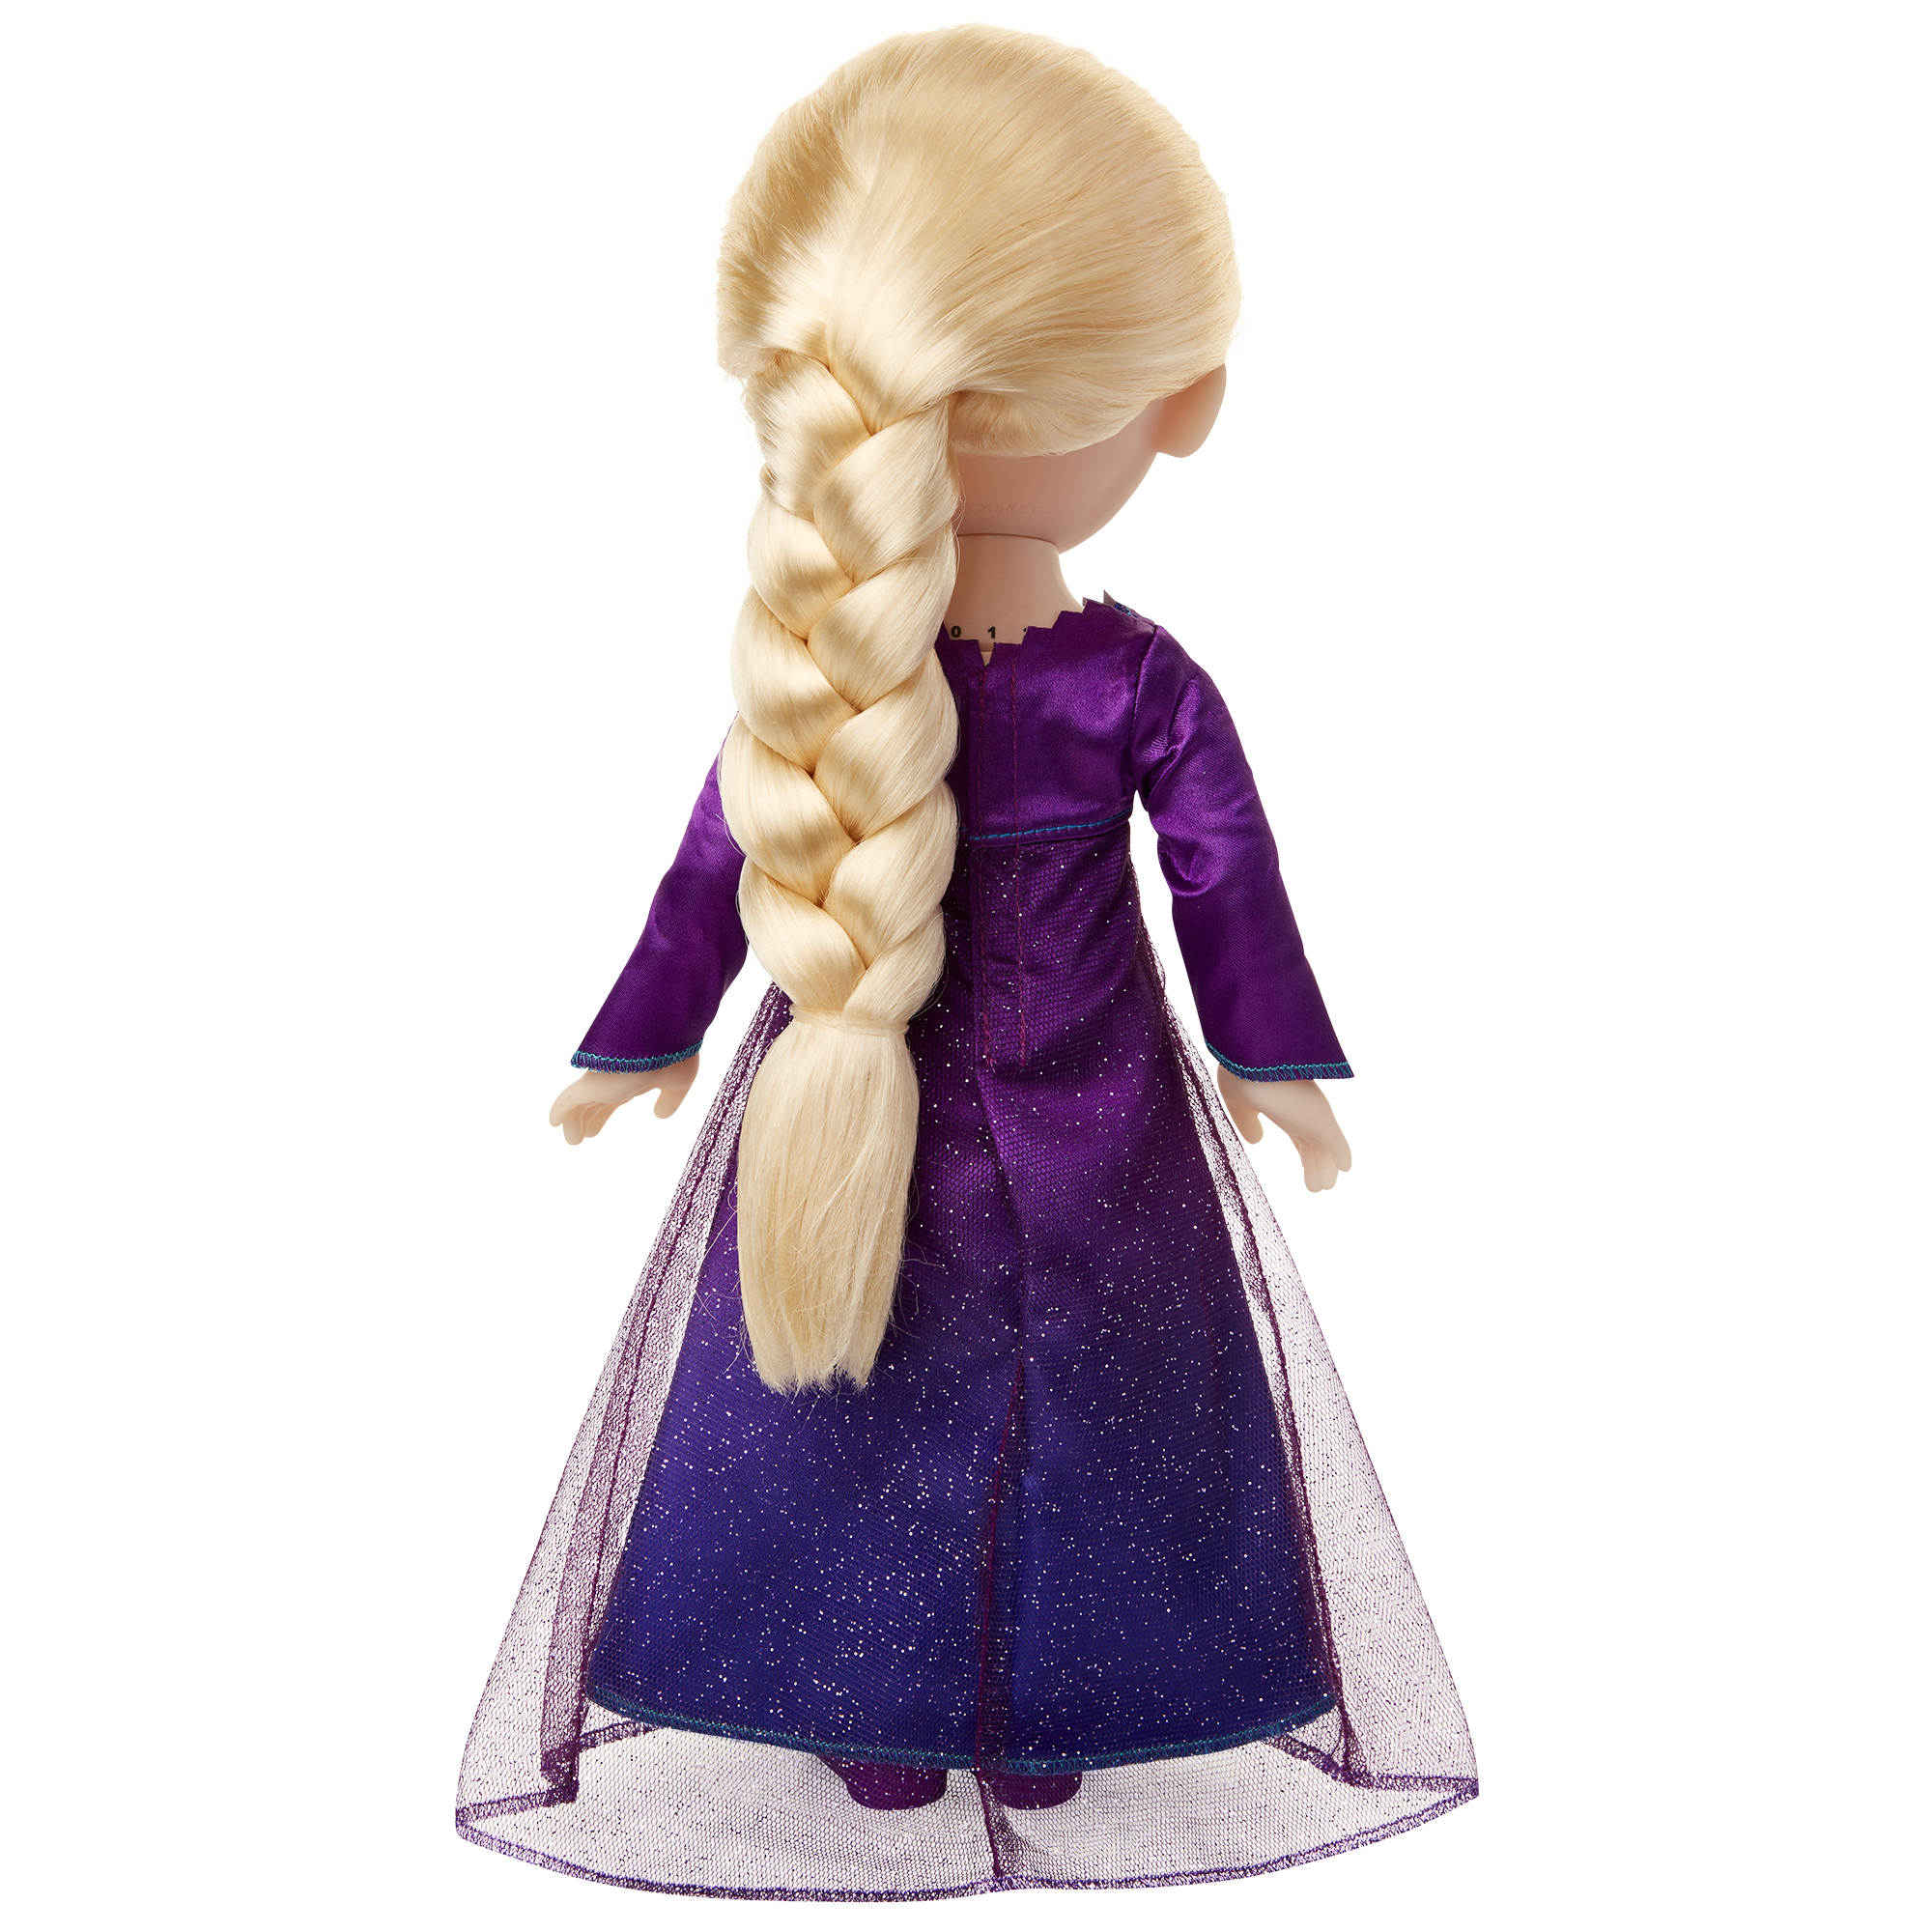 Disney Frozen 207031-V1 2 Elsa Musical Doll Sings Into the Unknown, Features 14 Film Phrases, 14" - image 4 of 10